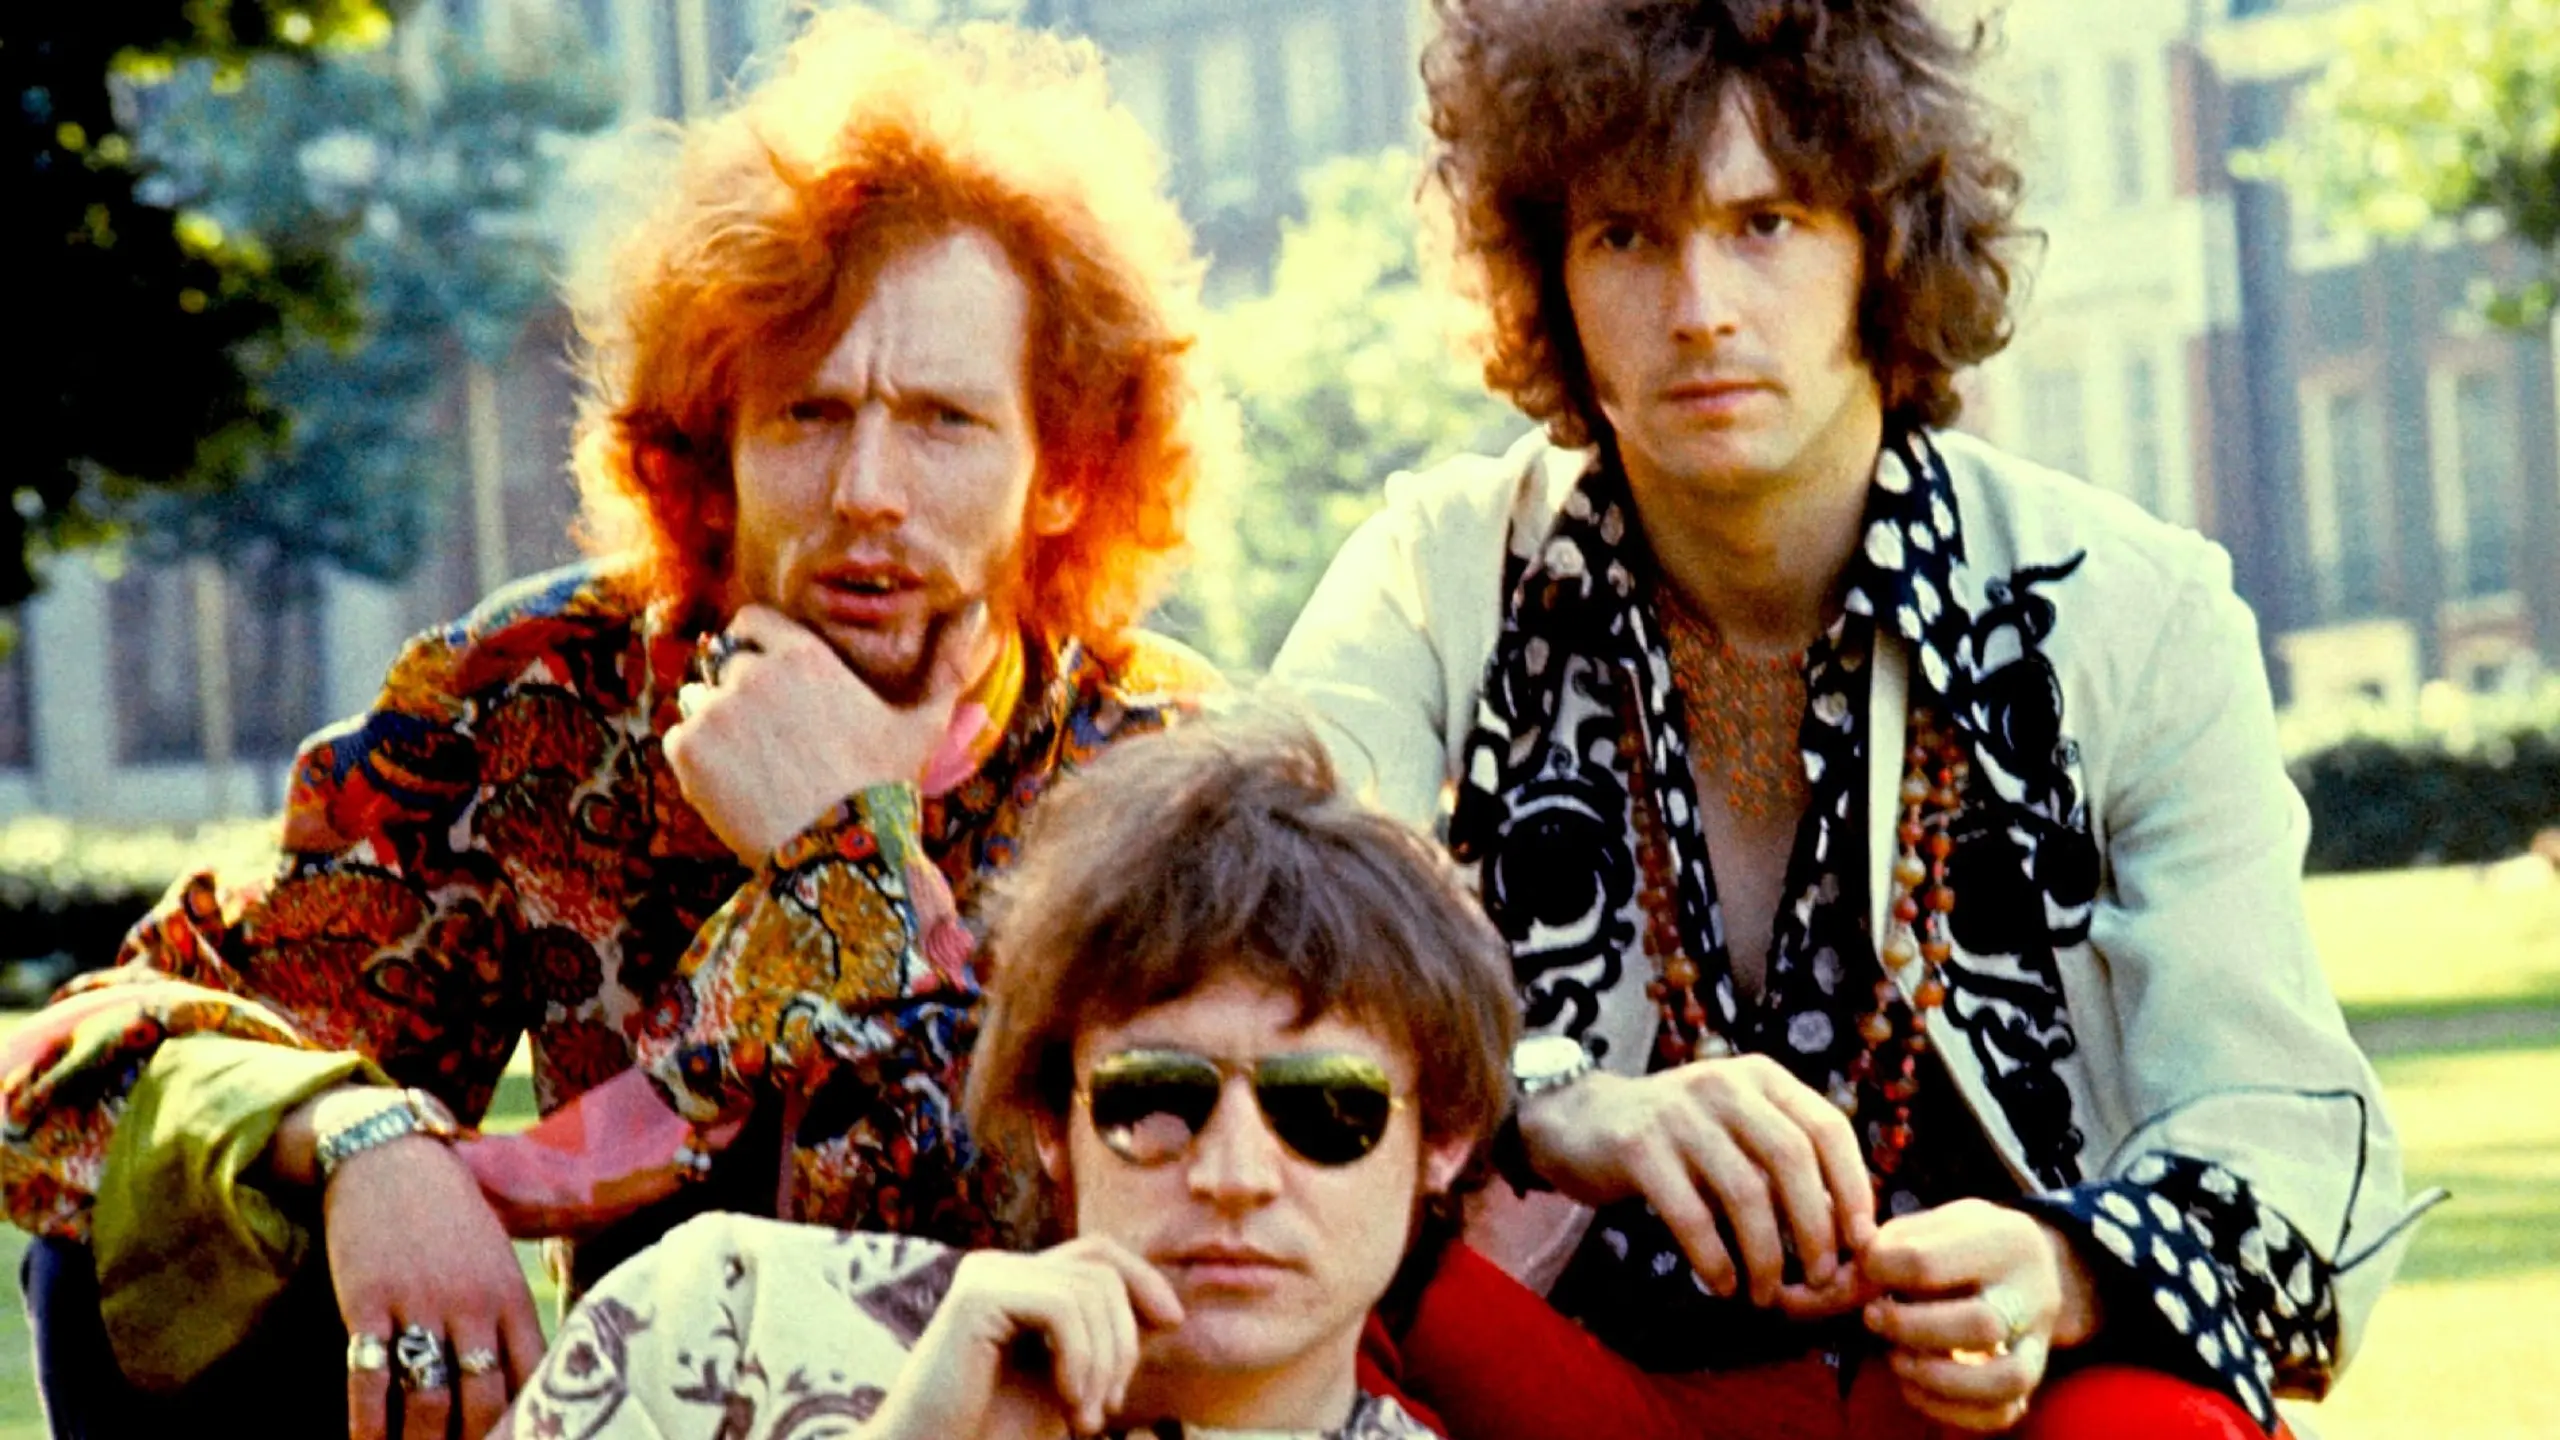 Classic Artists: Cream – Their Fully Authorized Story